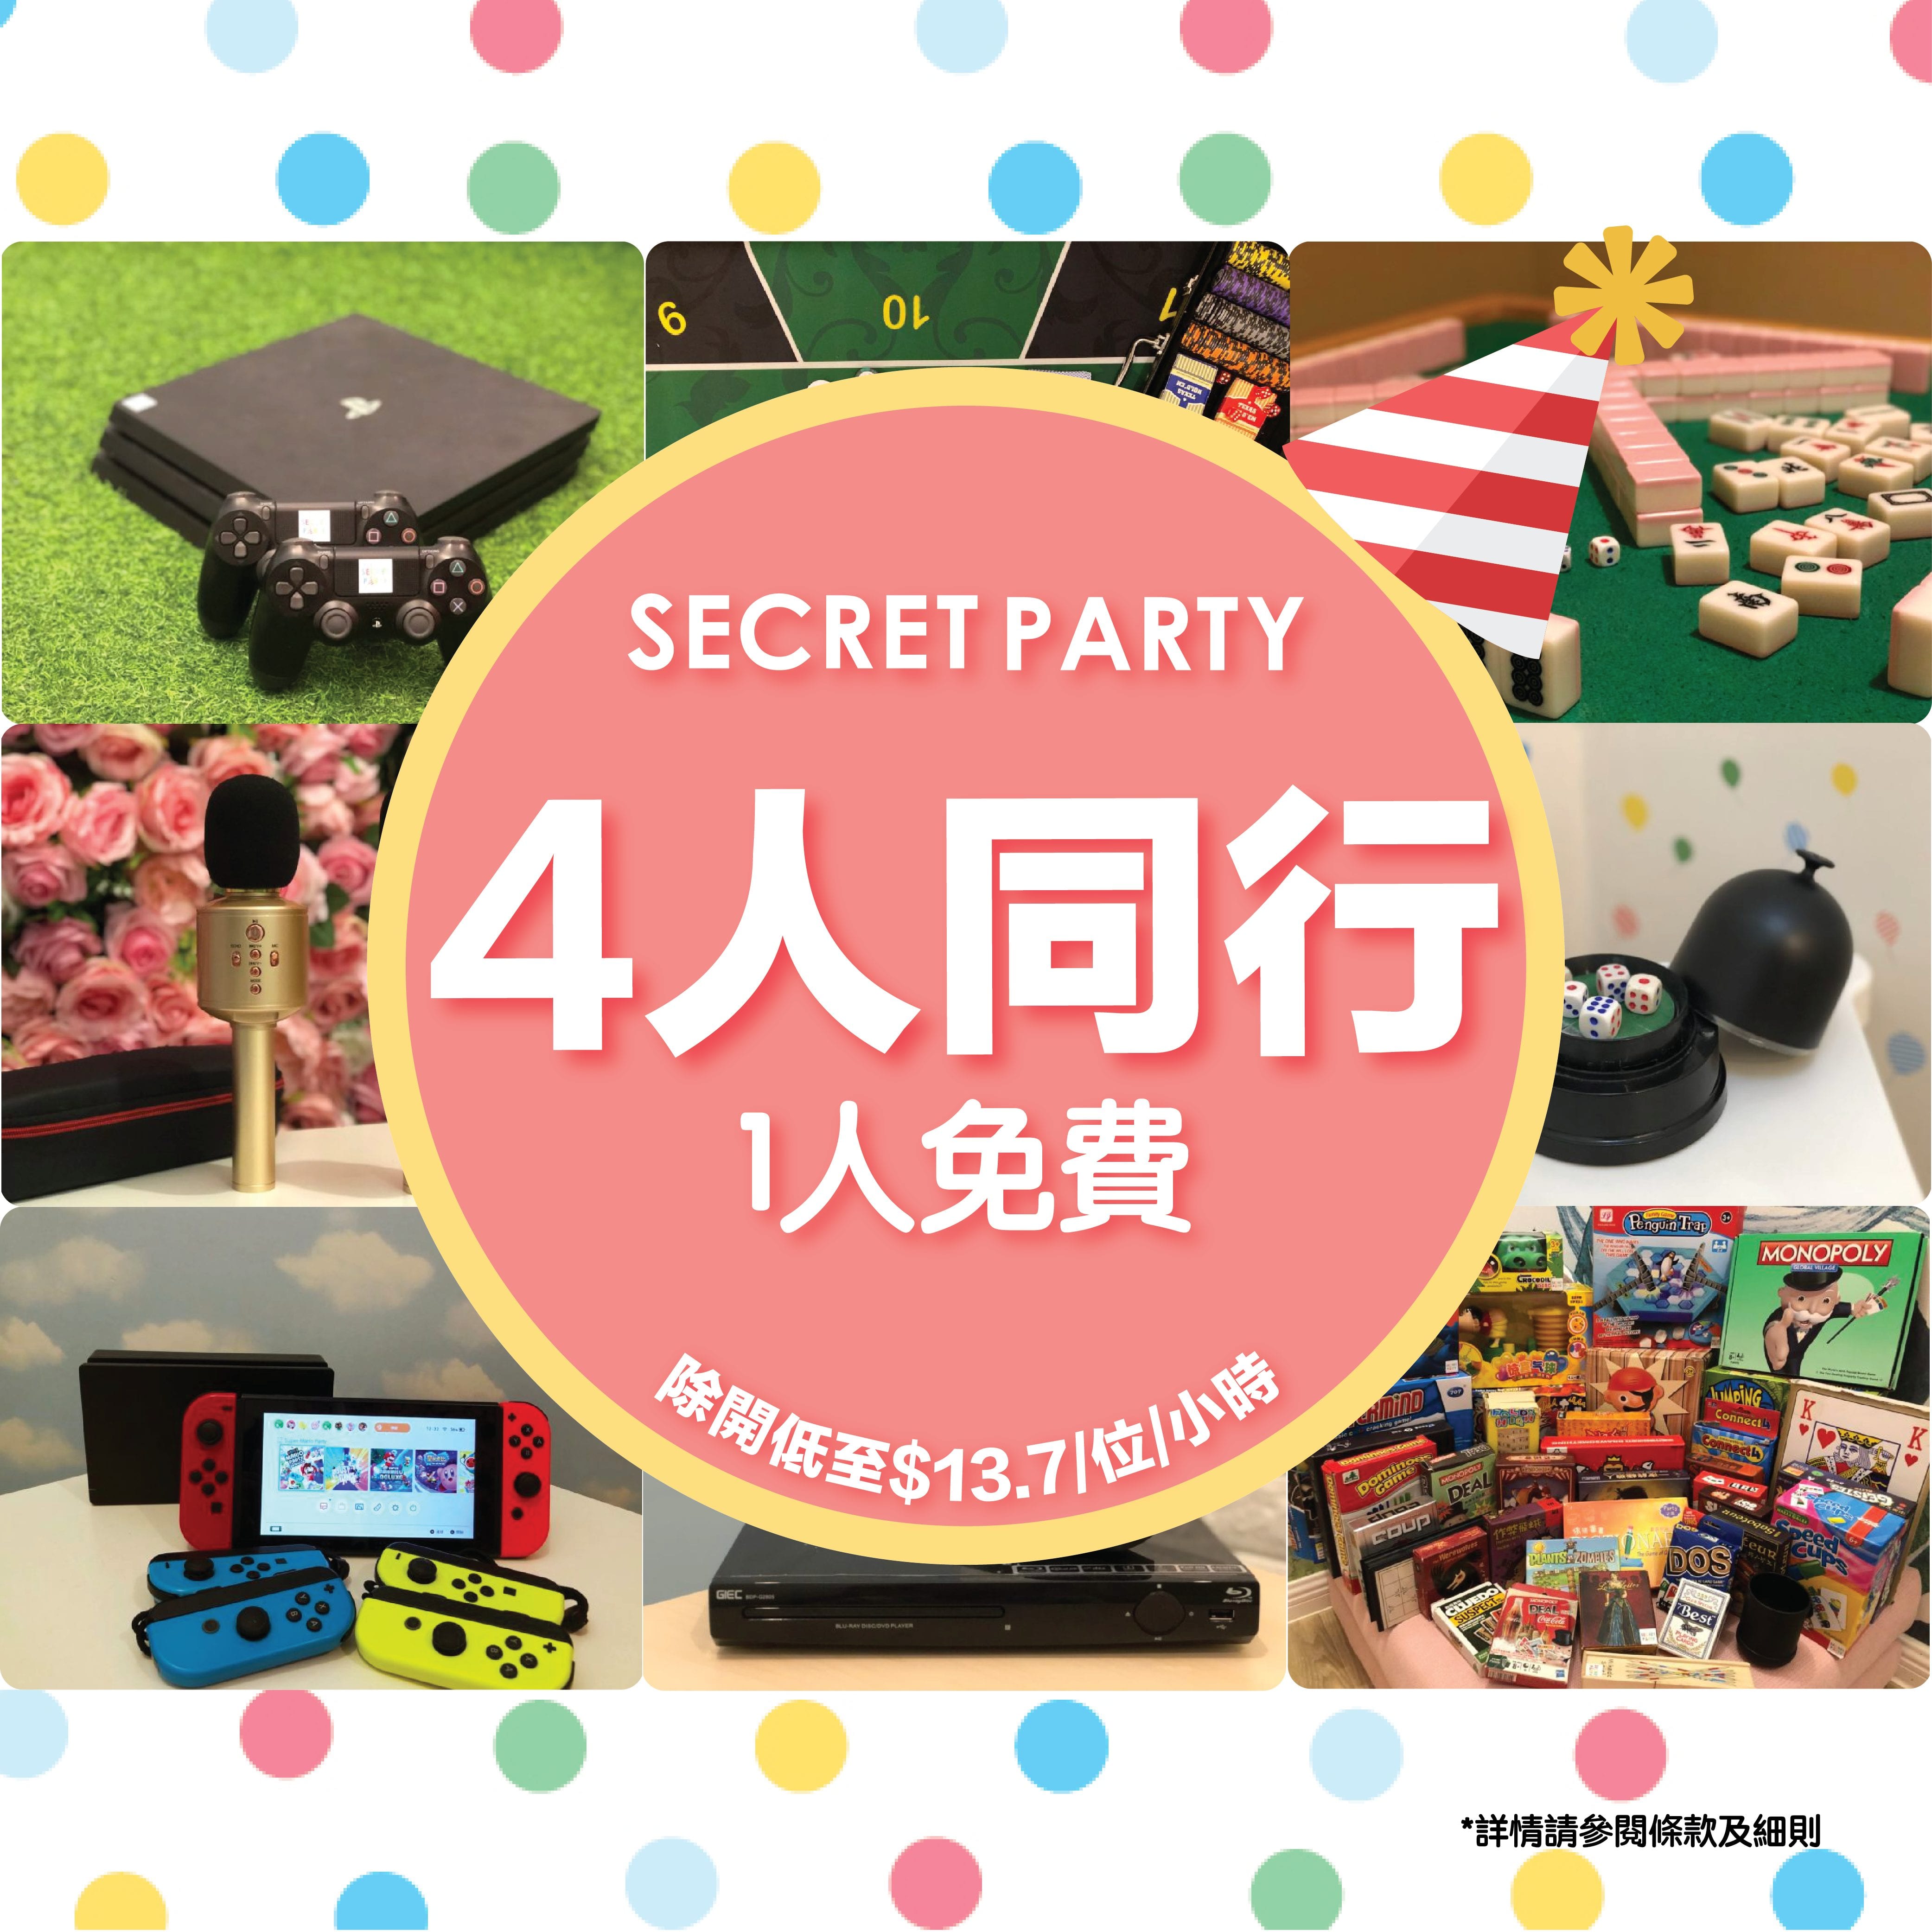 Party Room 最強優惠：【4人同行，1人免費】